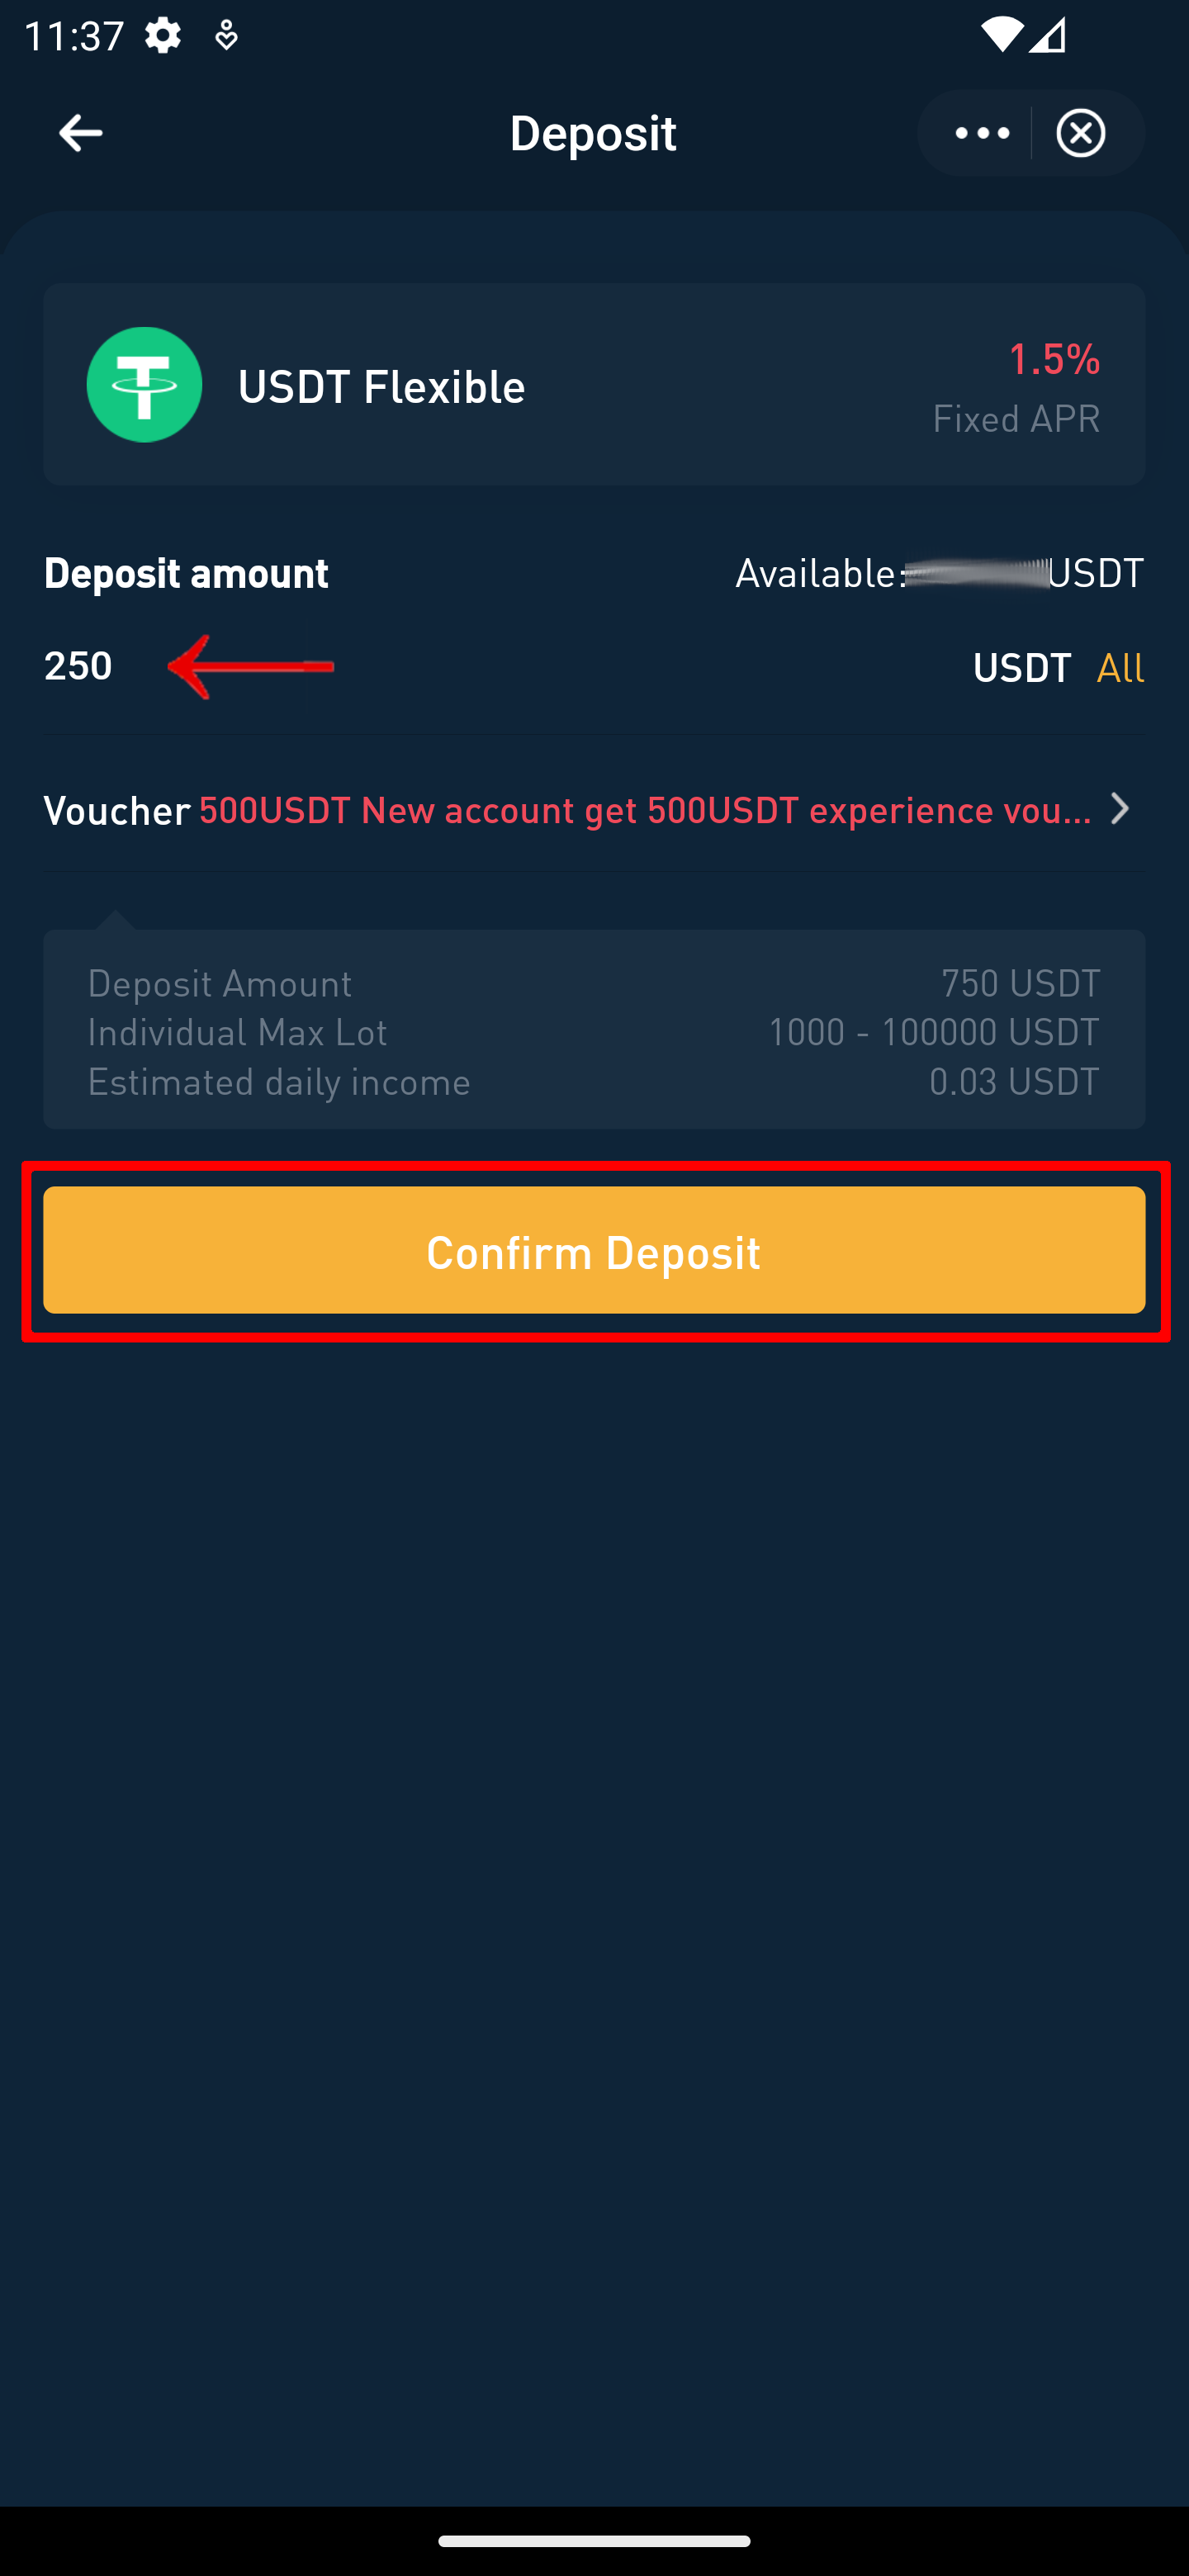 8v APP earn flexible USDT confirm deposit with confirm deposit button highlighted